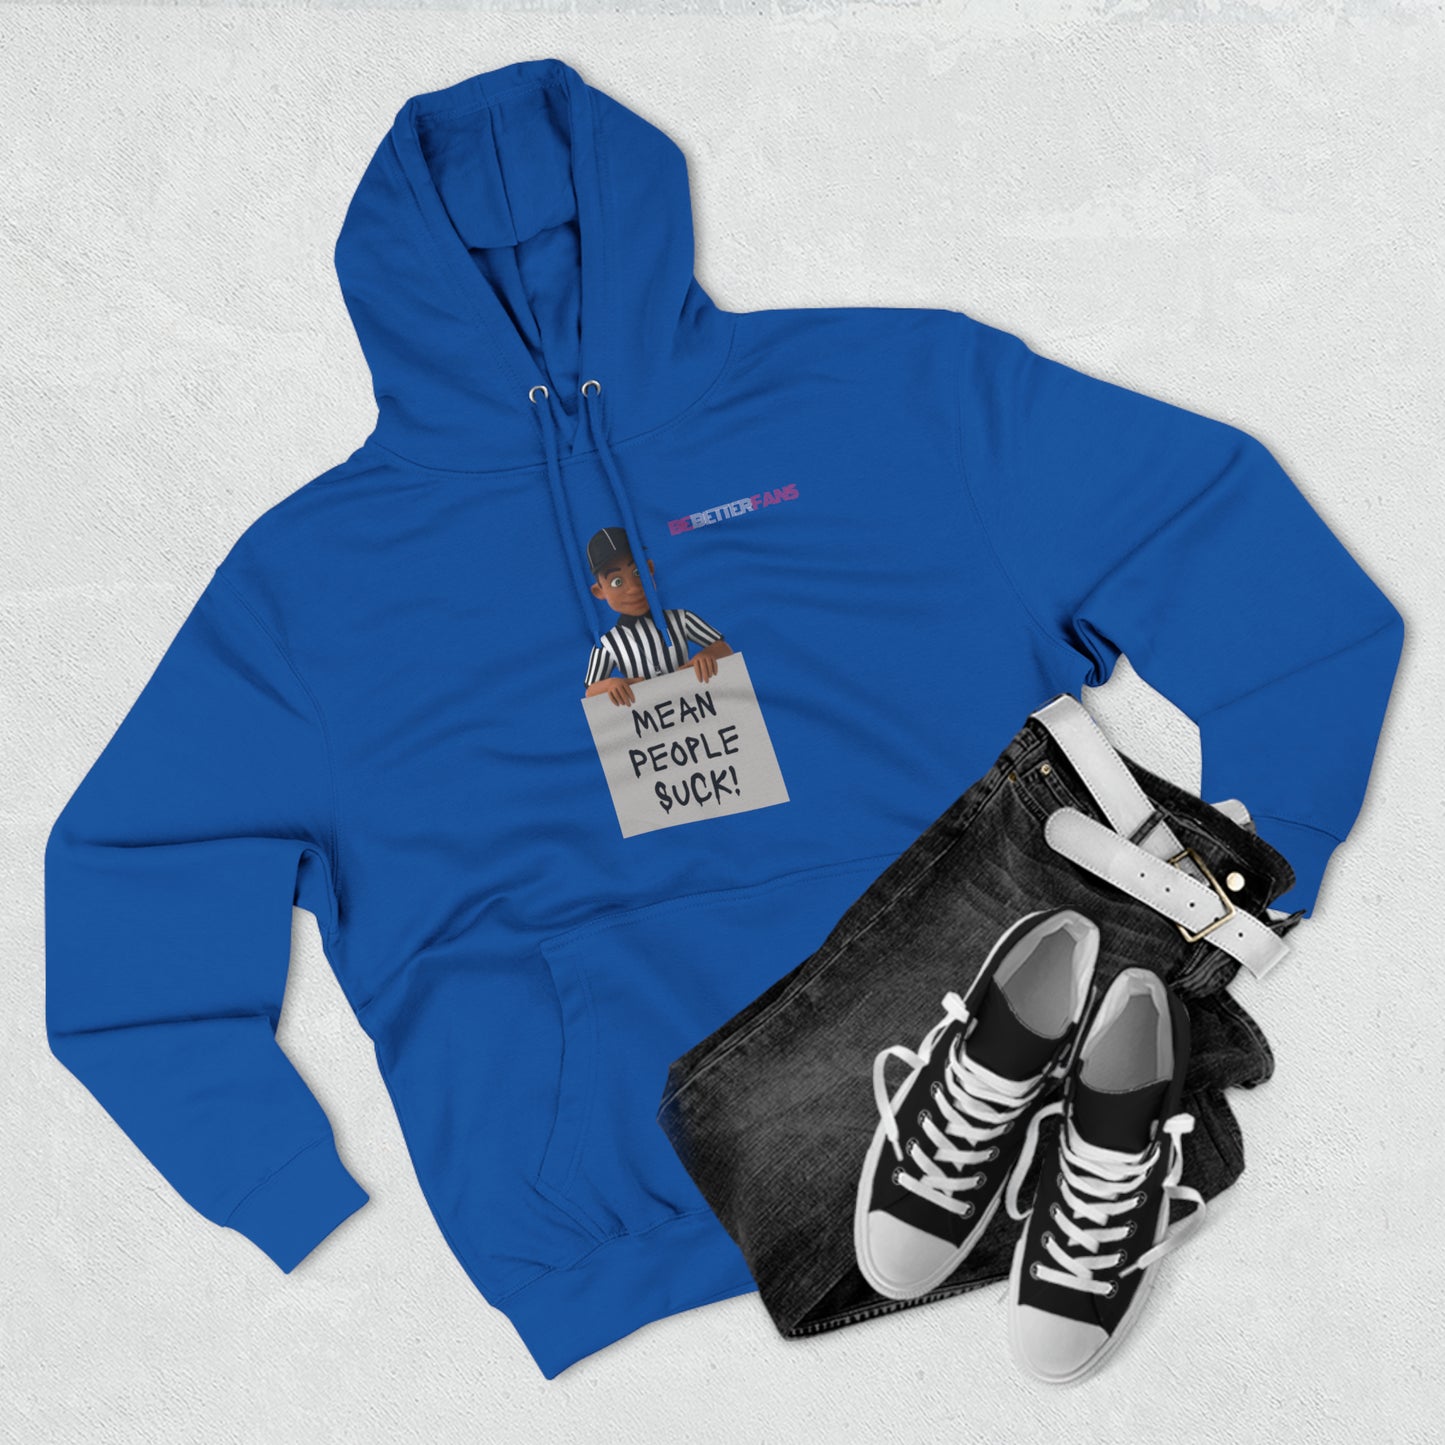 Mean People Suck Fleece Hoodie For Referees | Gifts for Refs | Fleece Lining Pullover